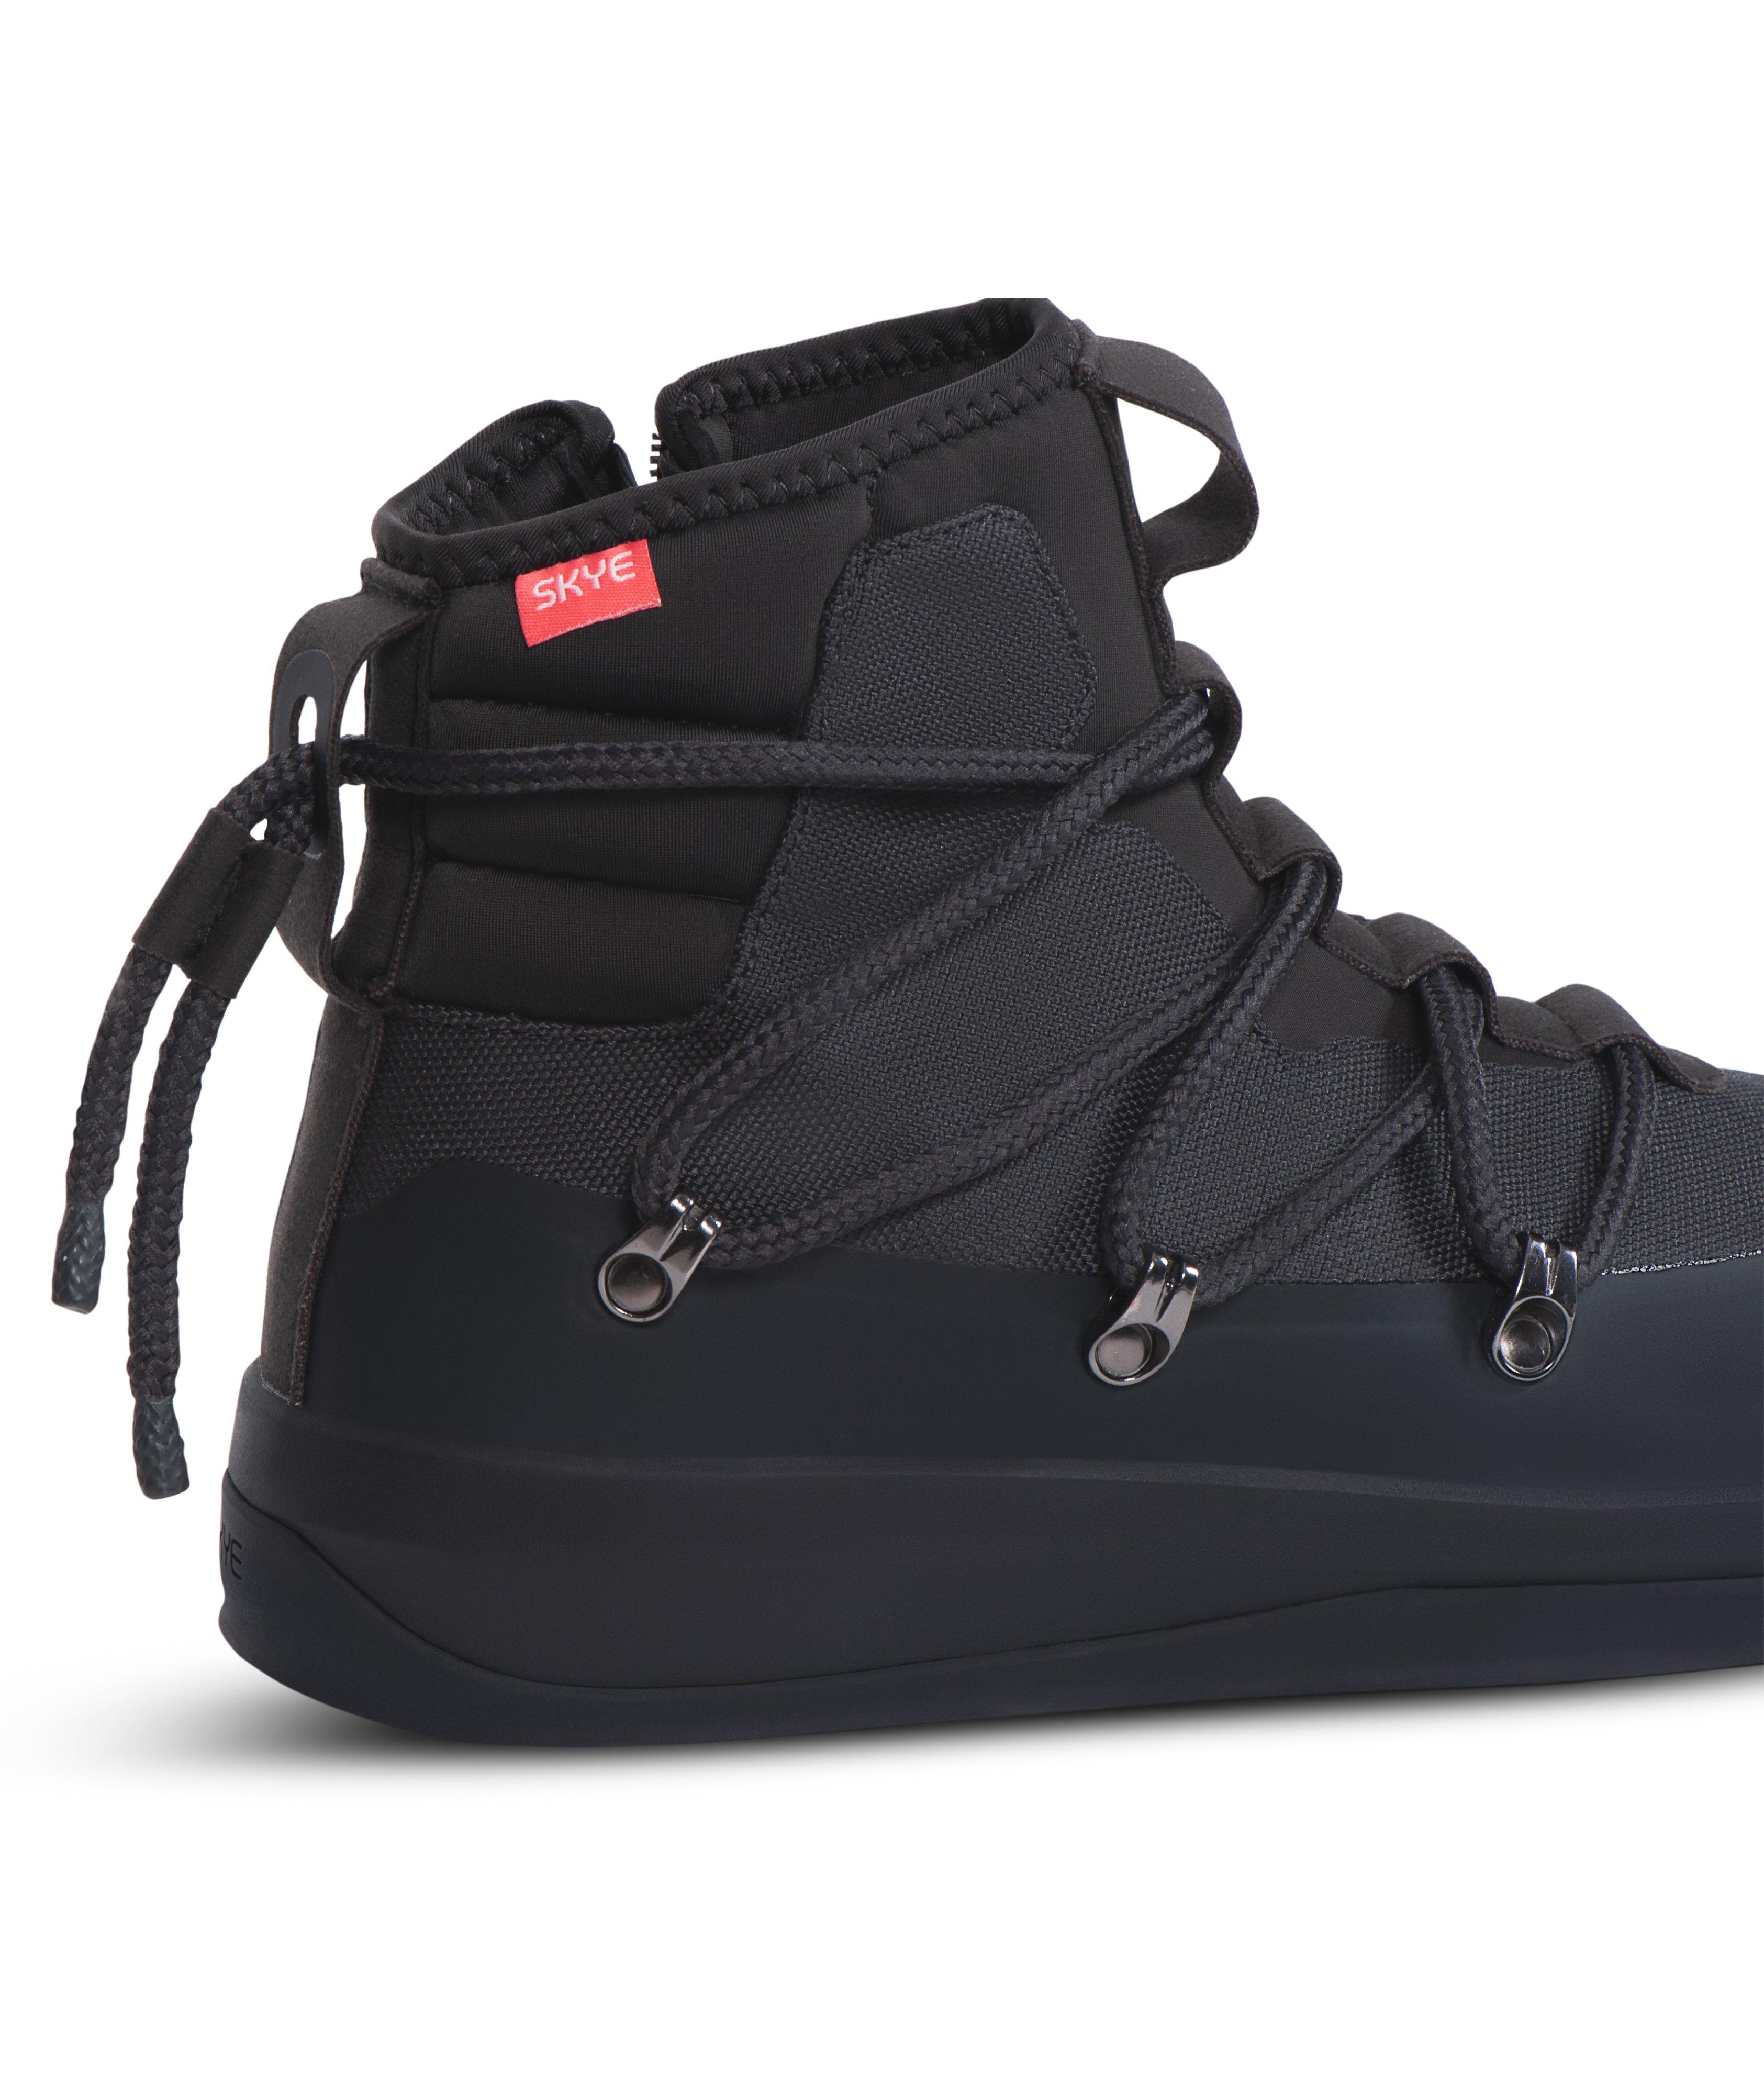 The Stnley High-Top Sneaker Boots image 4